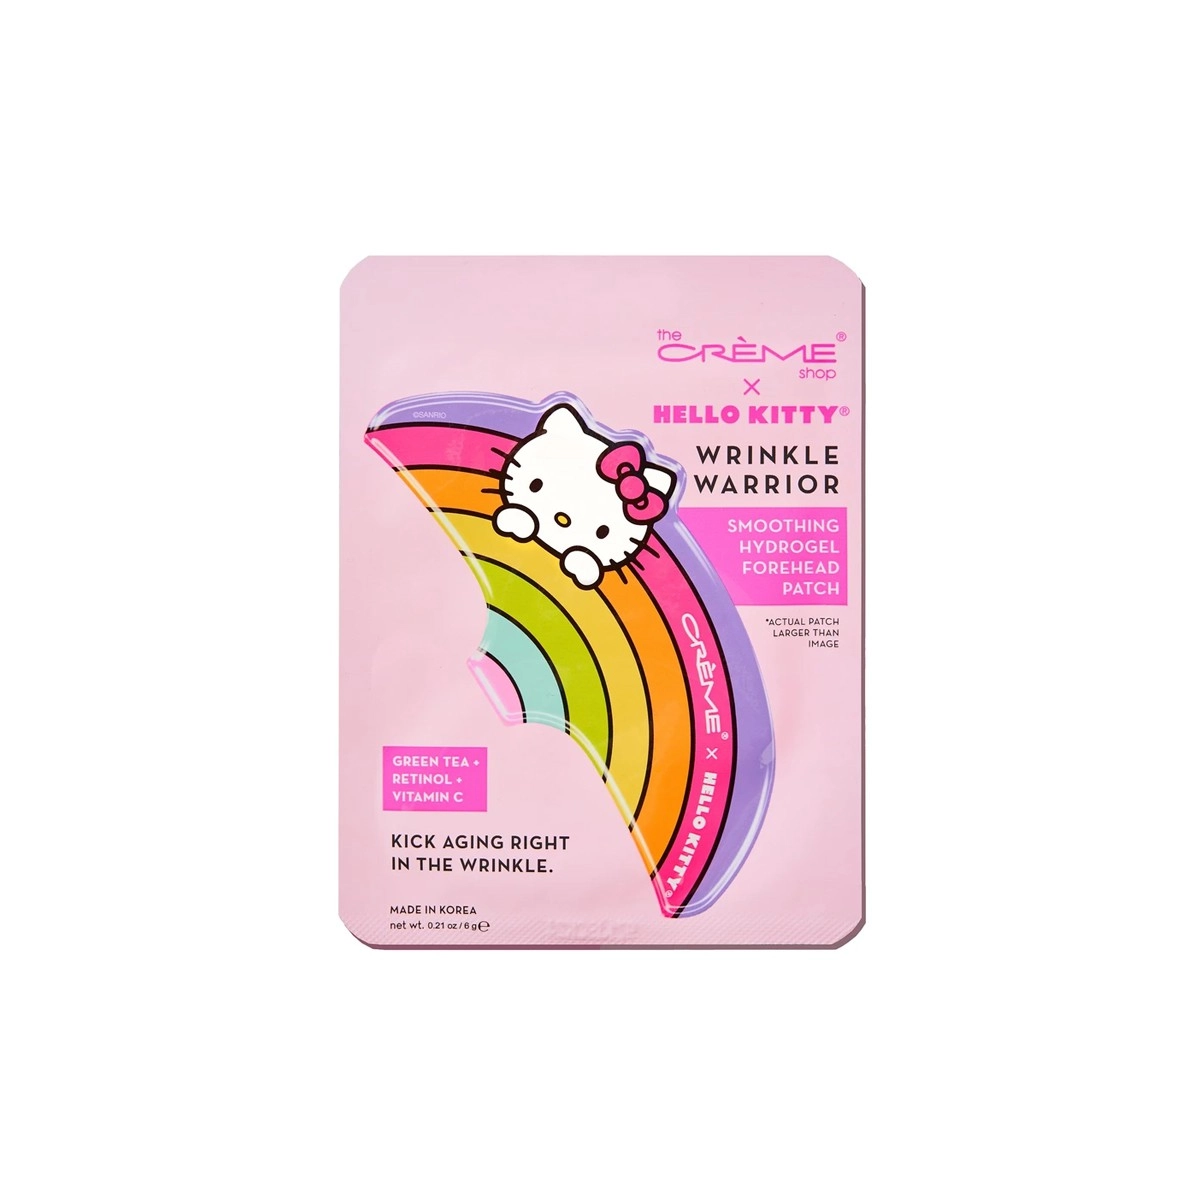 the Crème Shop x Hello Kitty - Wrinkle Warrior Forehead Patch